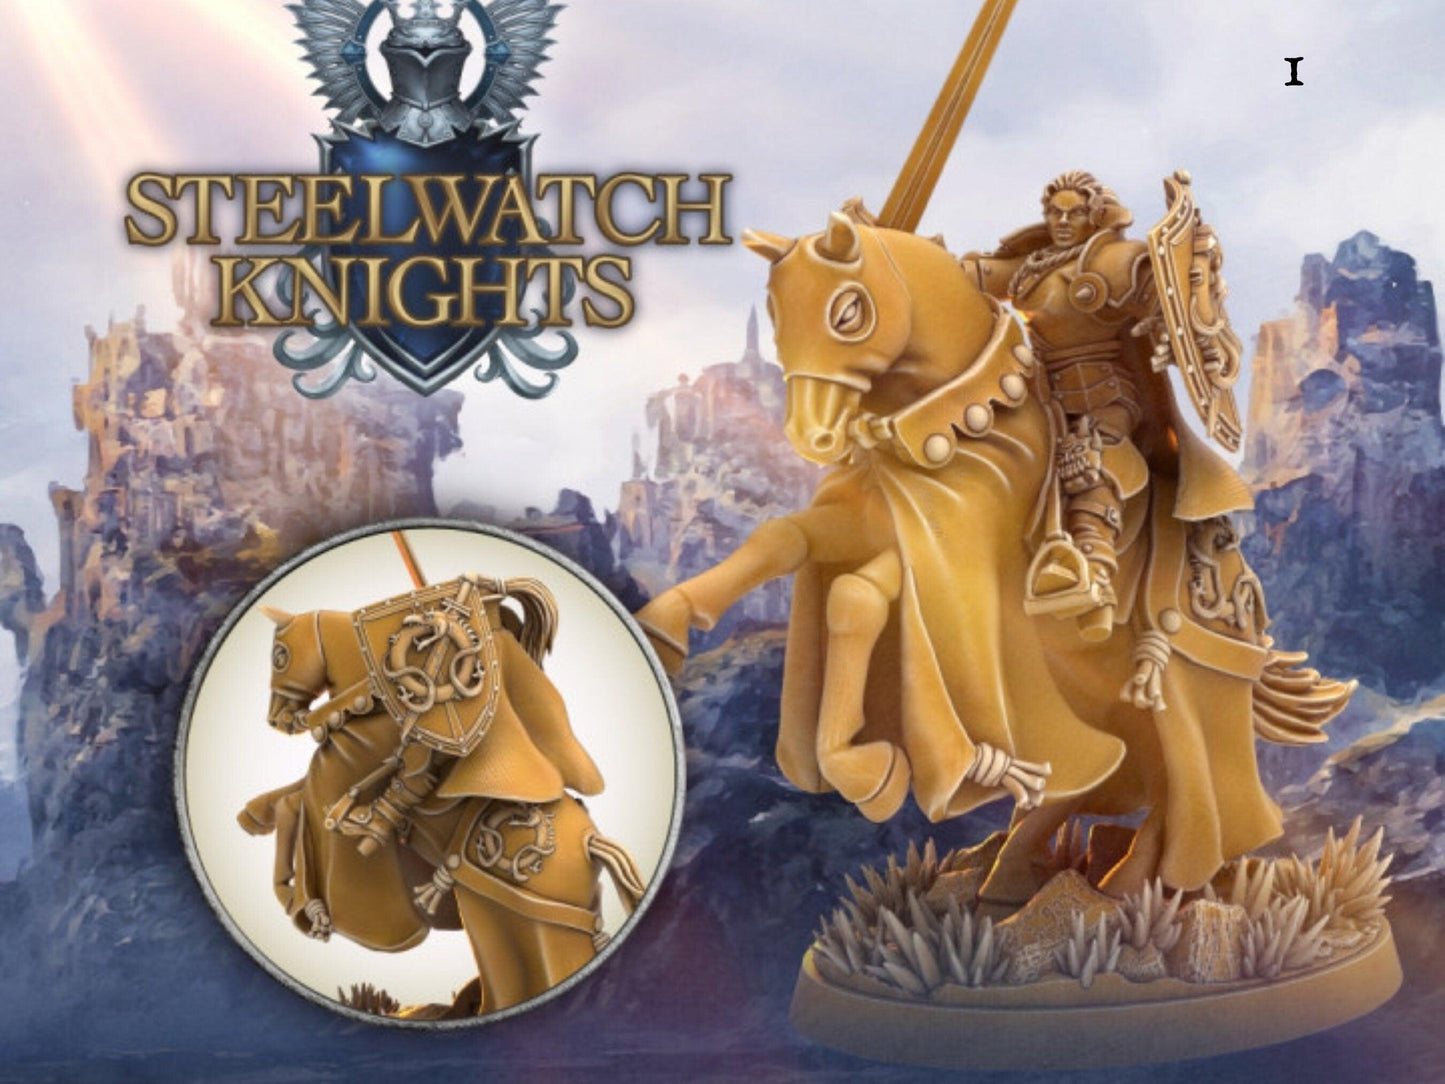 Mounted Paladin miniature Steelwatch | Dragon's Forge | 28mm Scale | DnD Miniature | Dungeons and Dragons | Human miniature - Plague Miniatures shop for DnD Miniatures